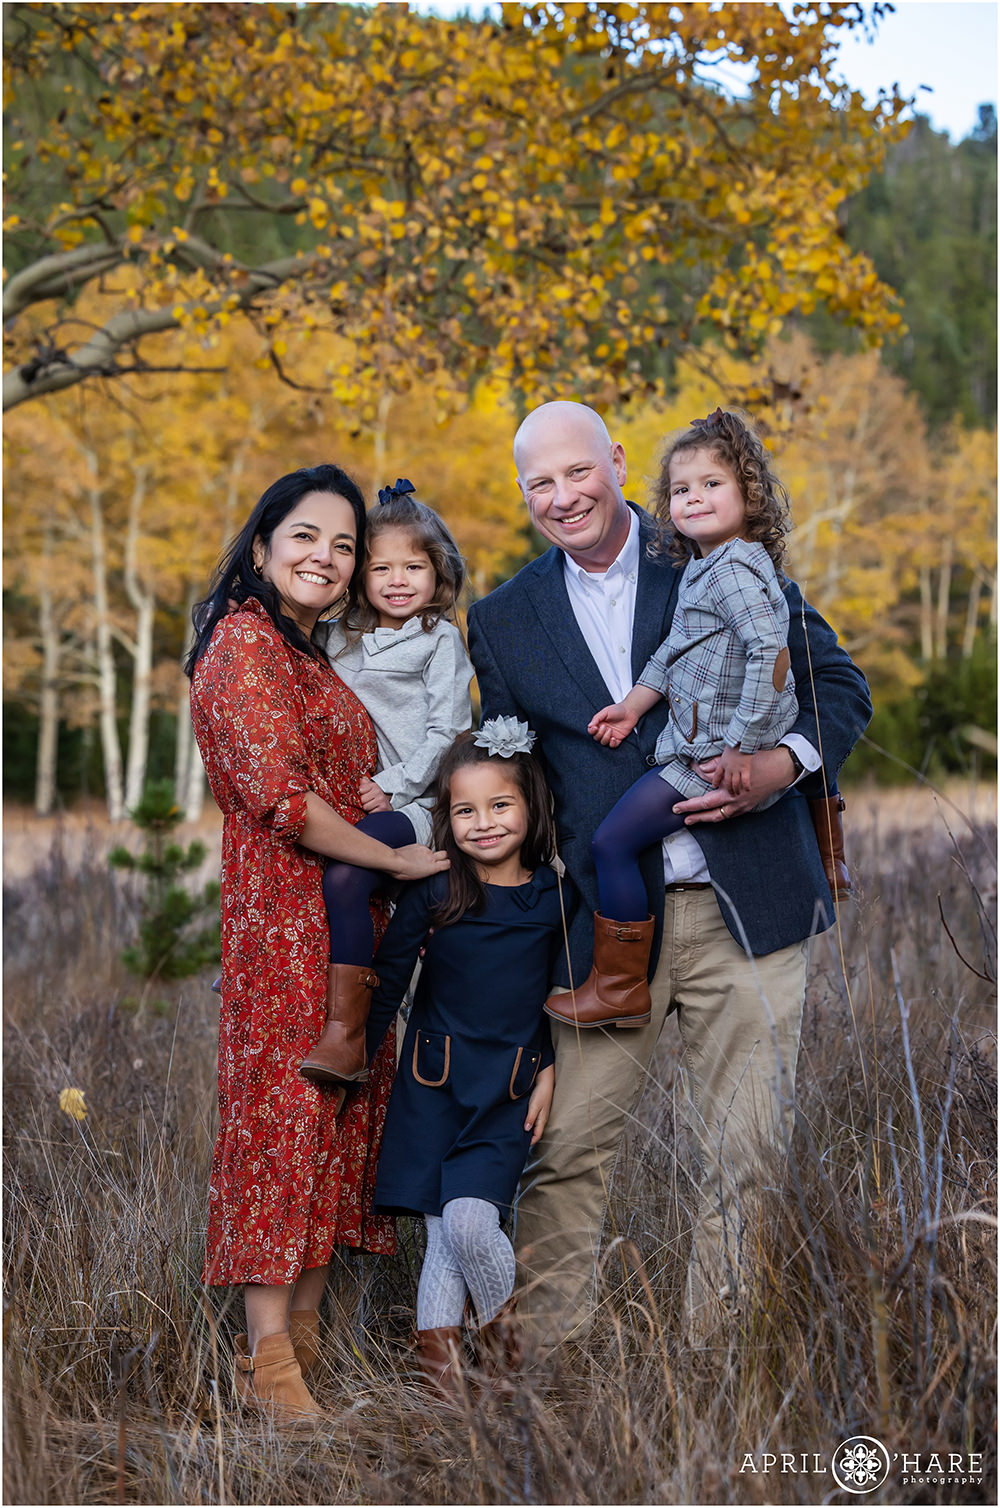 Beautiful family of 5 fall color photo in an Evergreen Colorado meadow with aspen trees